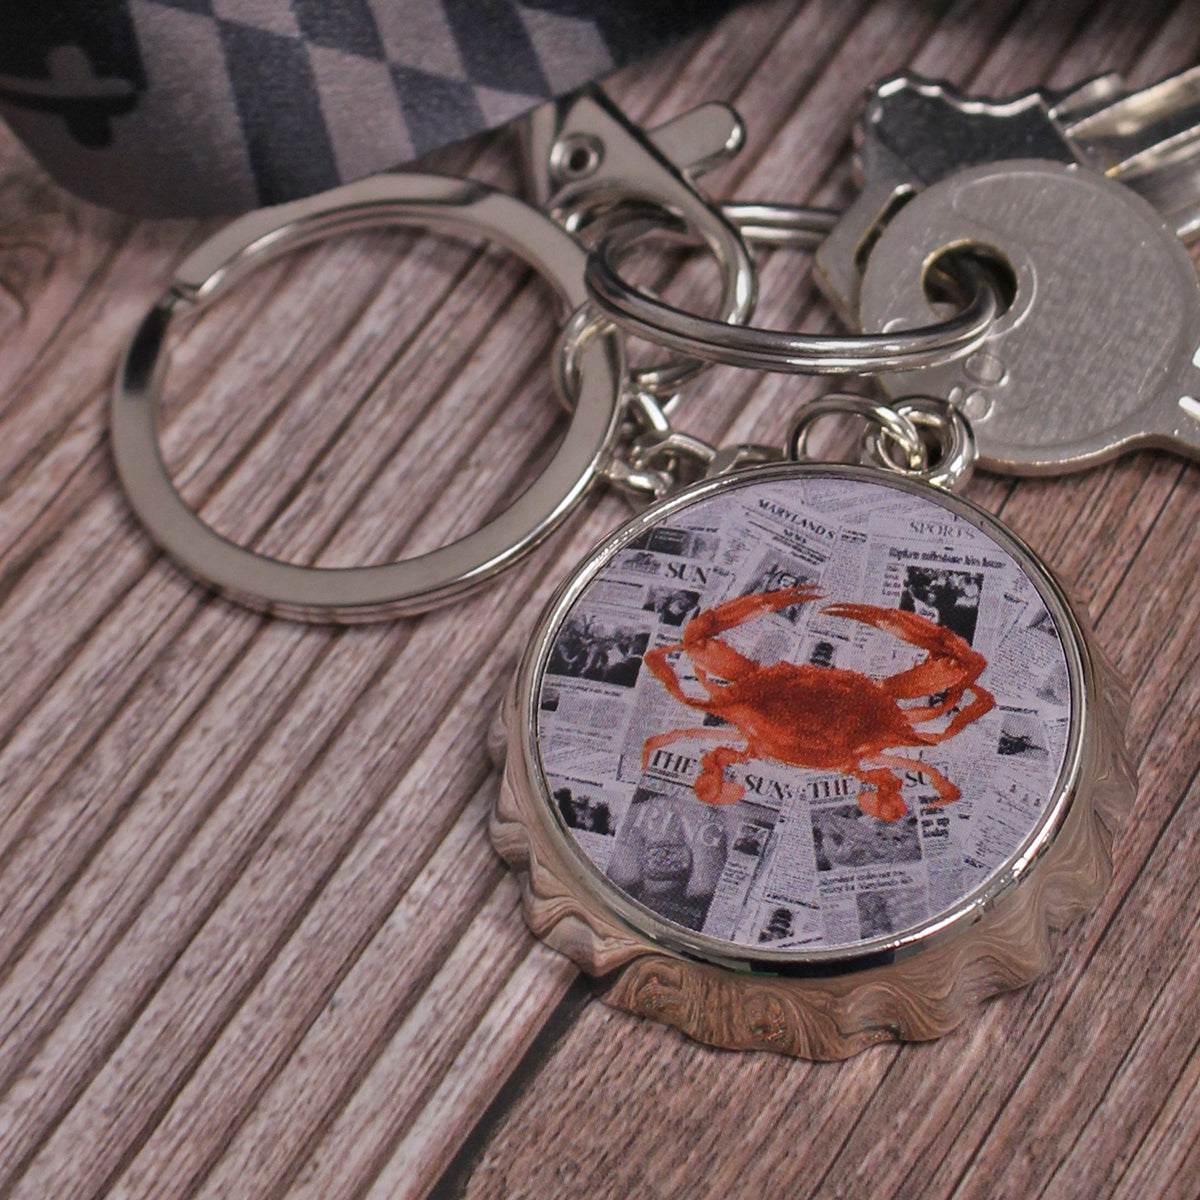 Newspaper Crab /  Bottle Cap Opener Key Chain - Route One Apparel